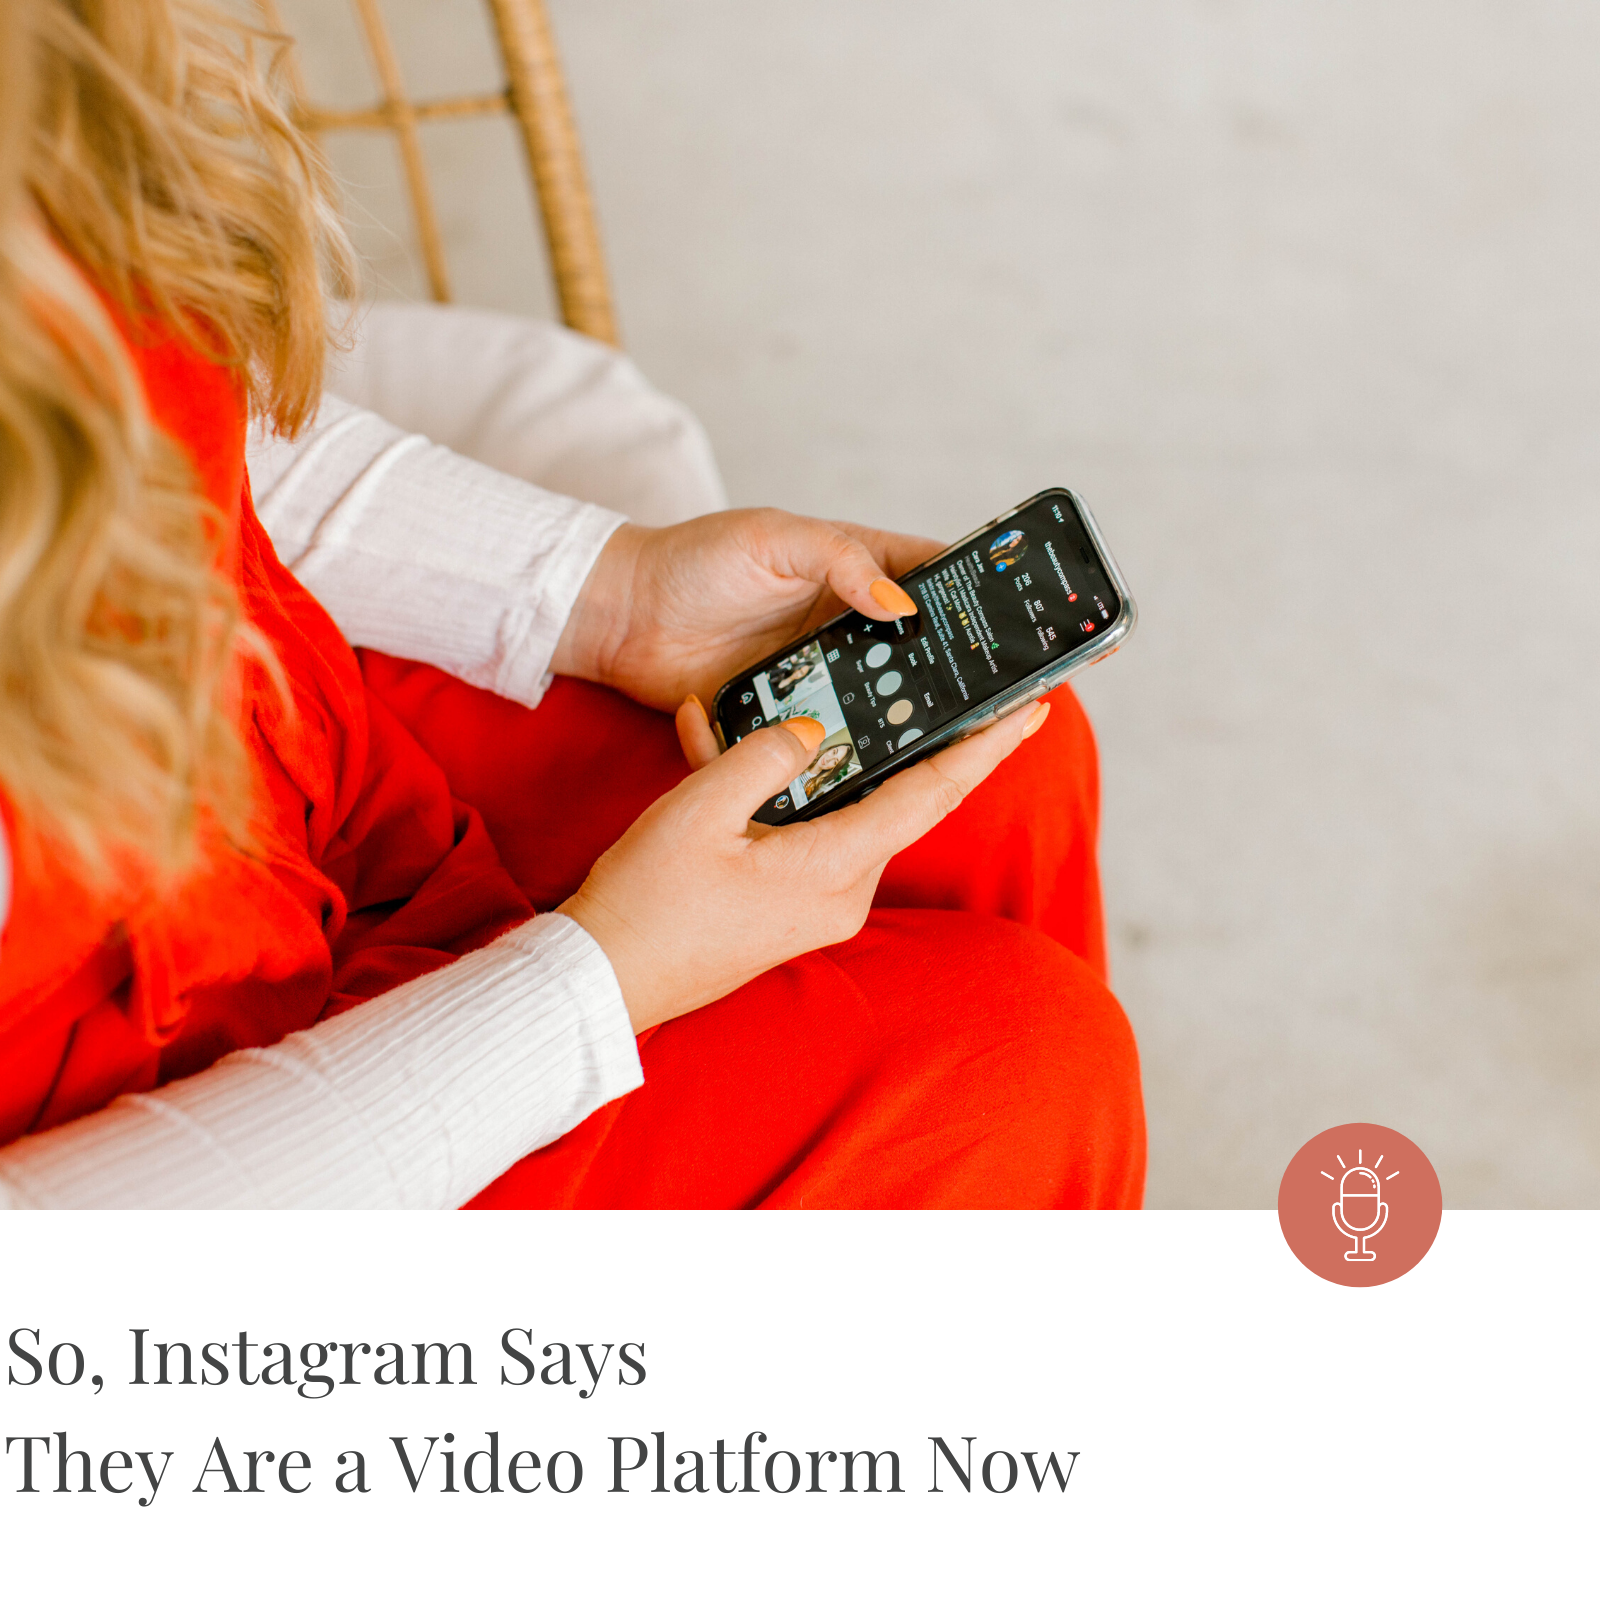 Episode #193 - So, Instagram Says They Are a Video Platform Now